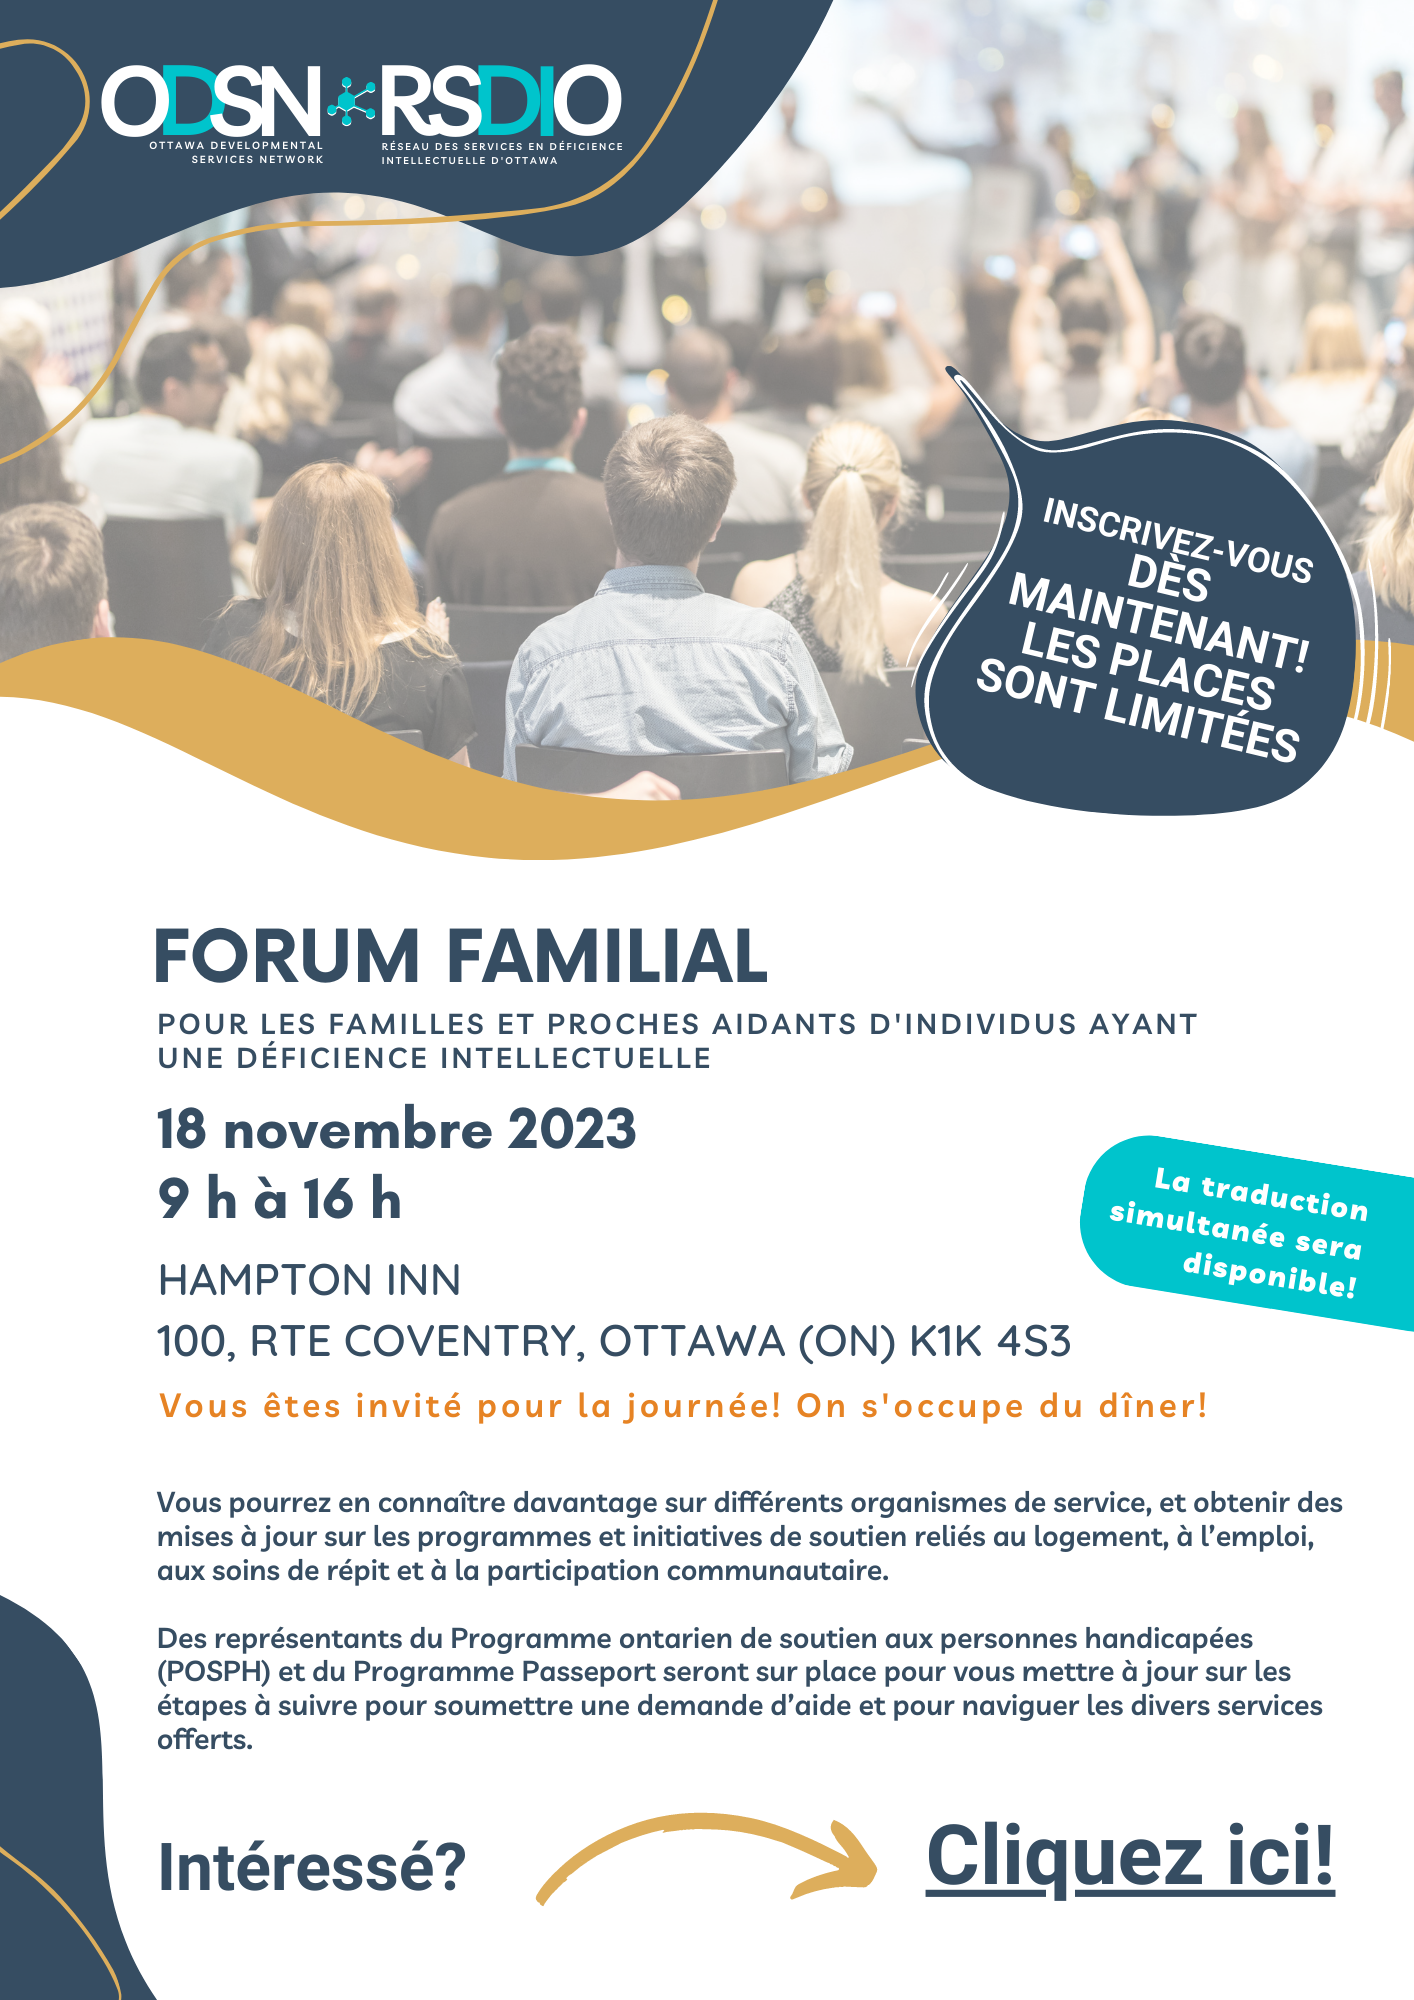 ODSN Family forum for caregivers and family members of individuals living with developmental disabilities in the Ottawa area poster